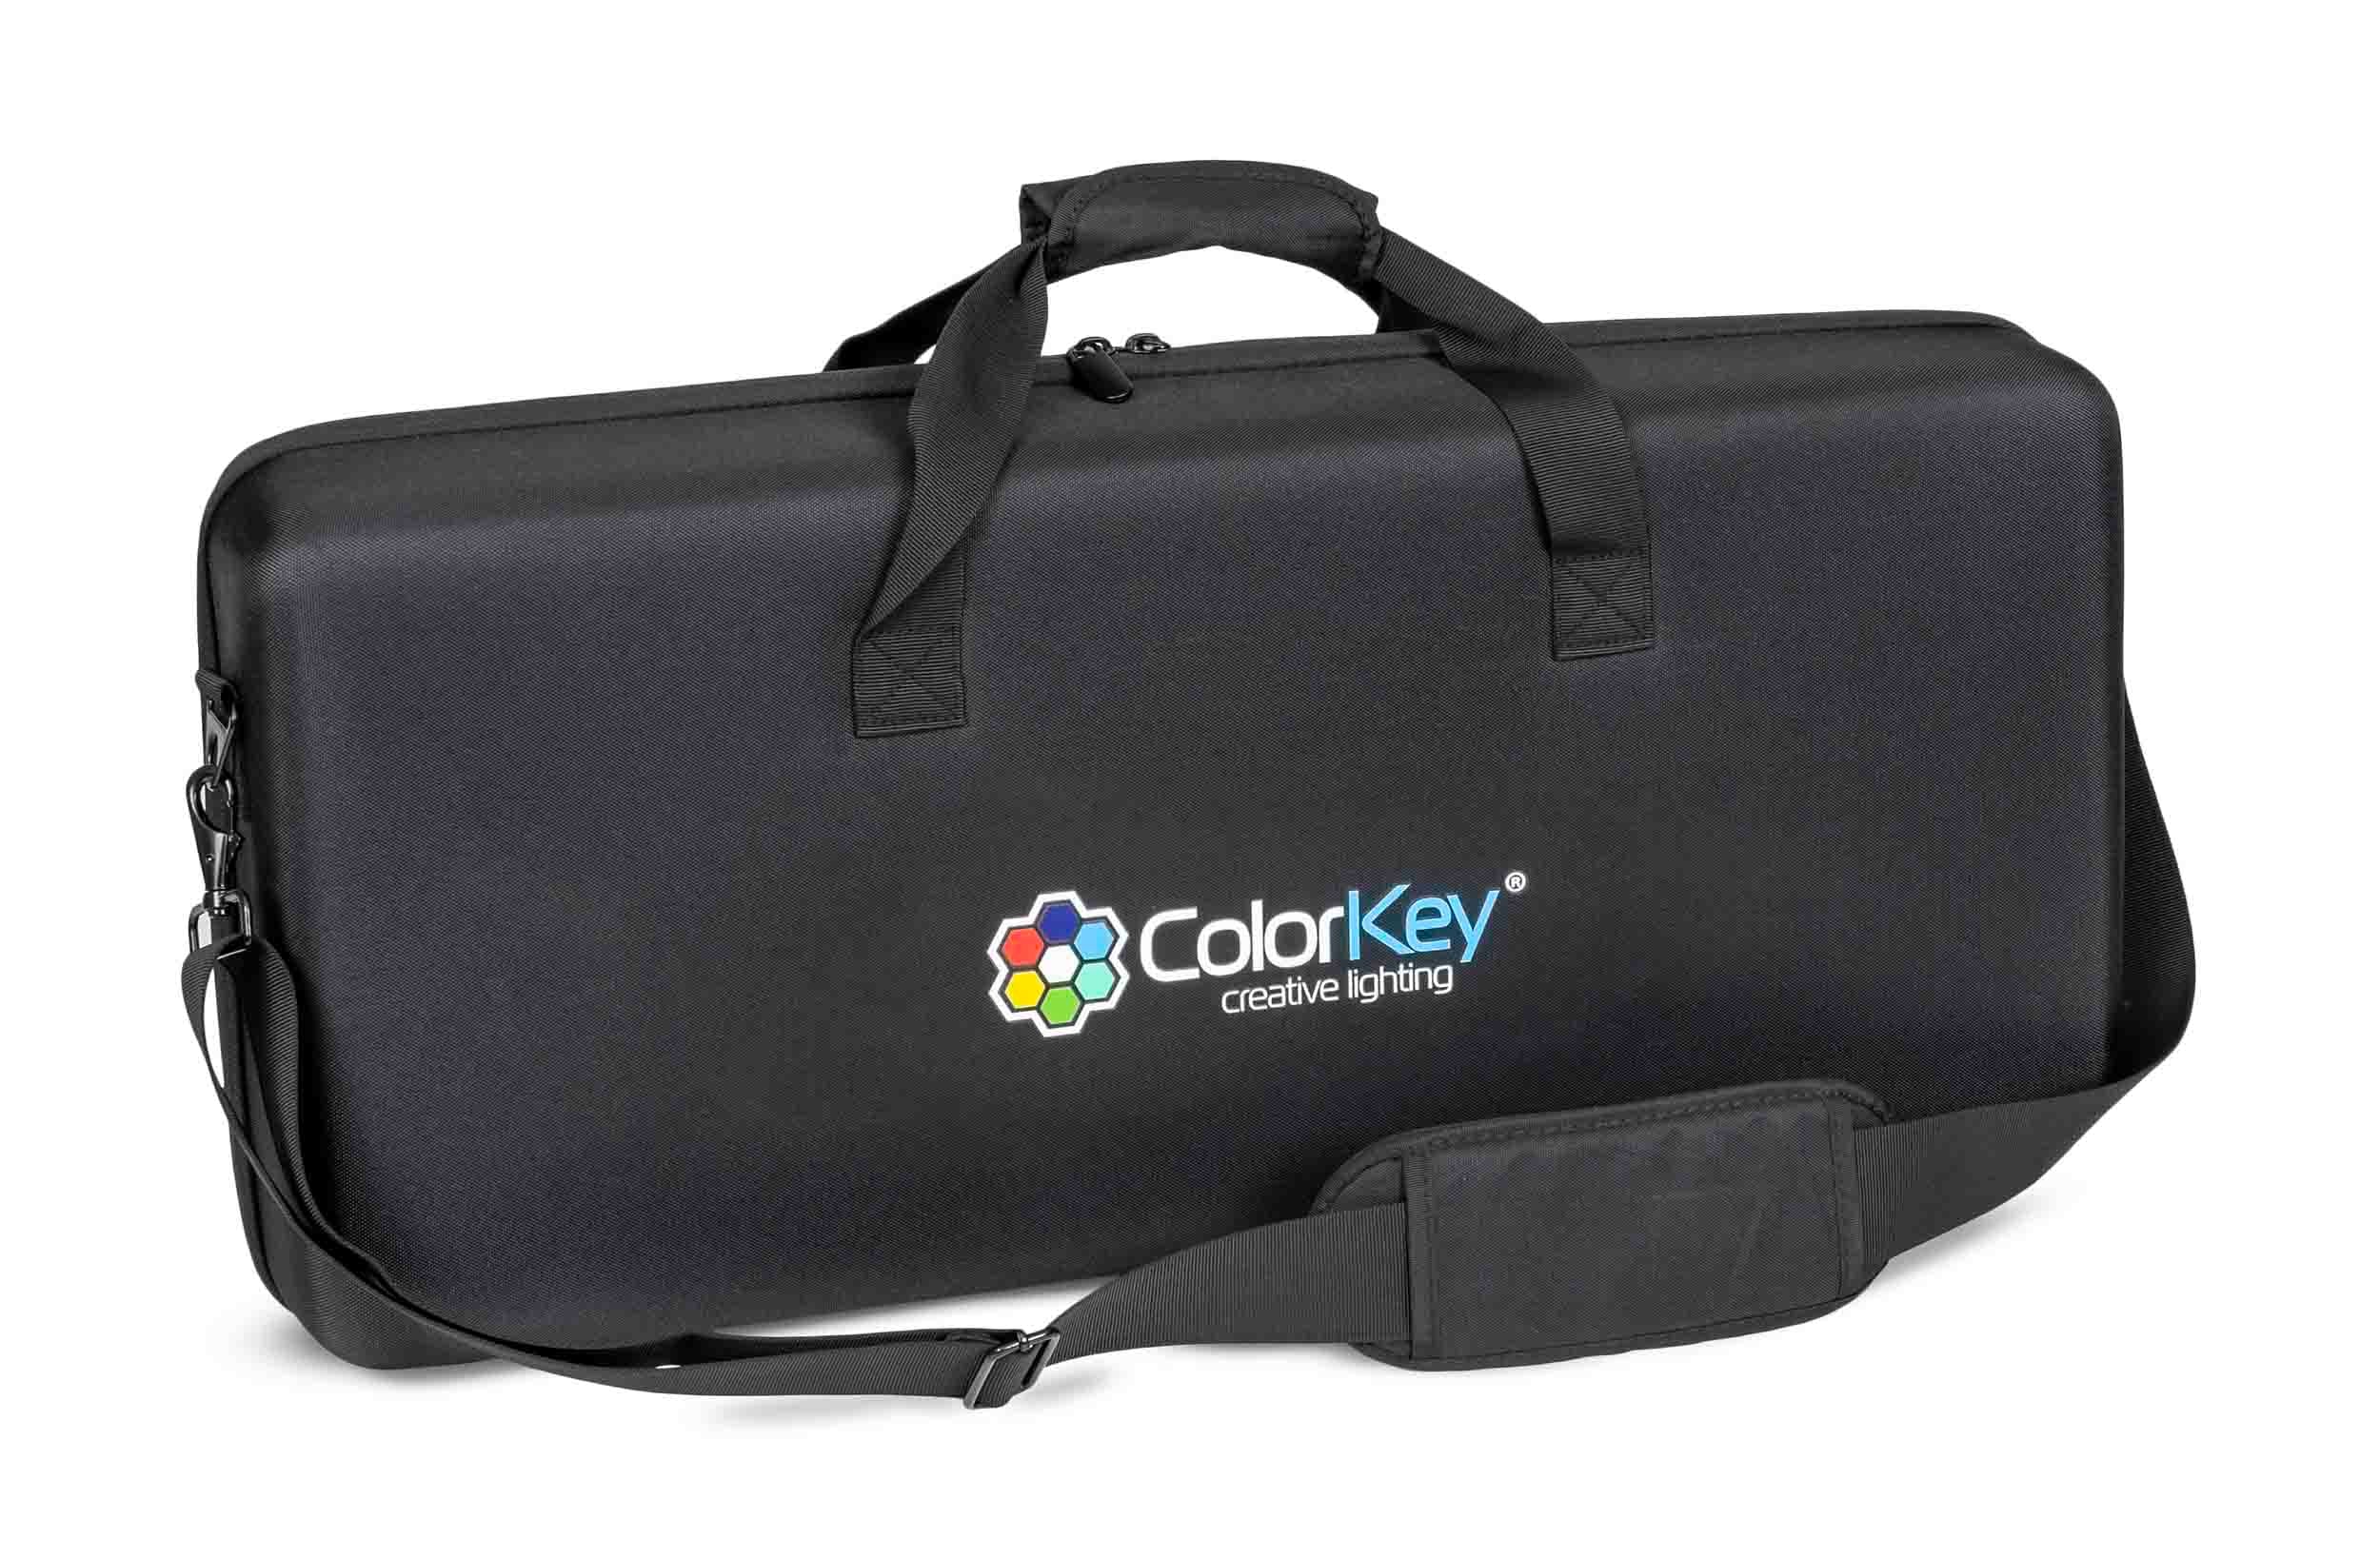 Colorkey CKU-9074, Hardshell Case for AirPar HEX 4 by ColorKey